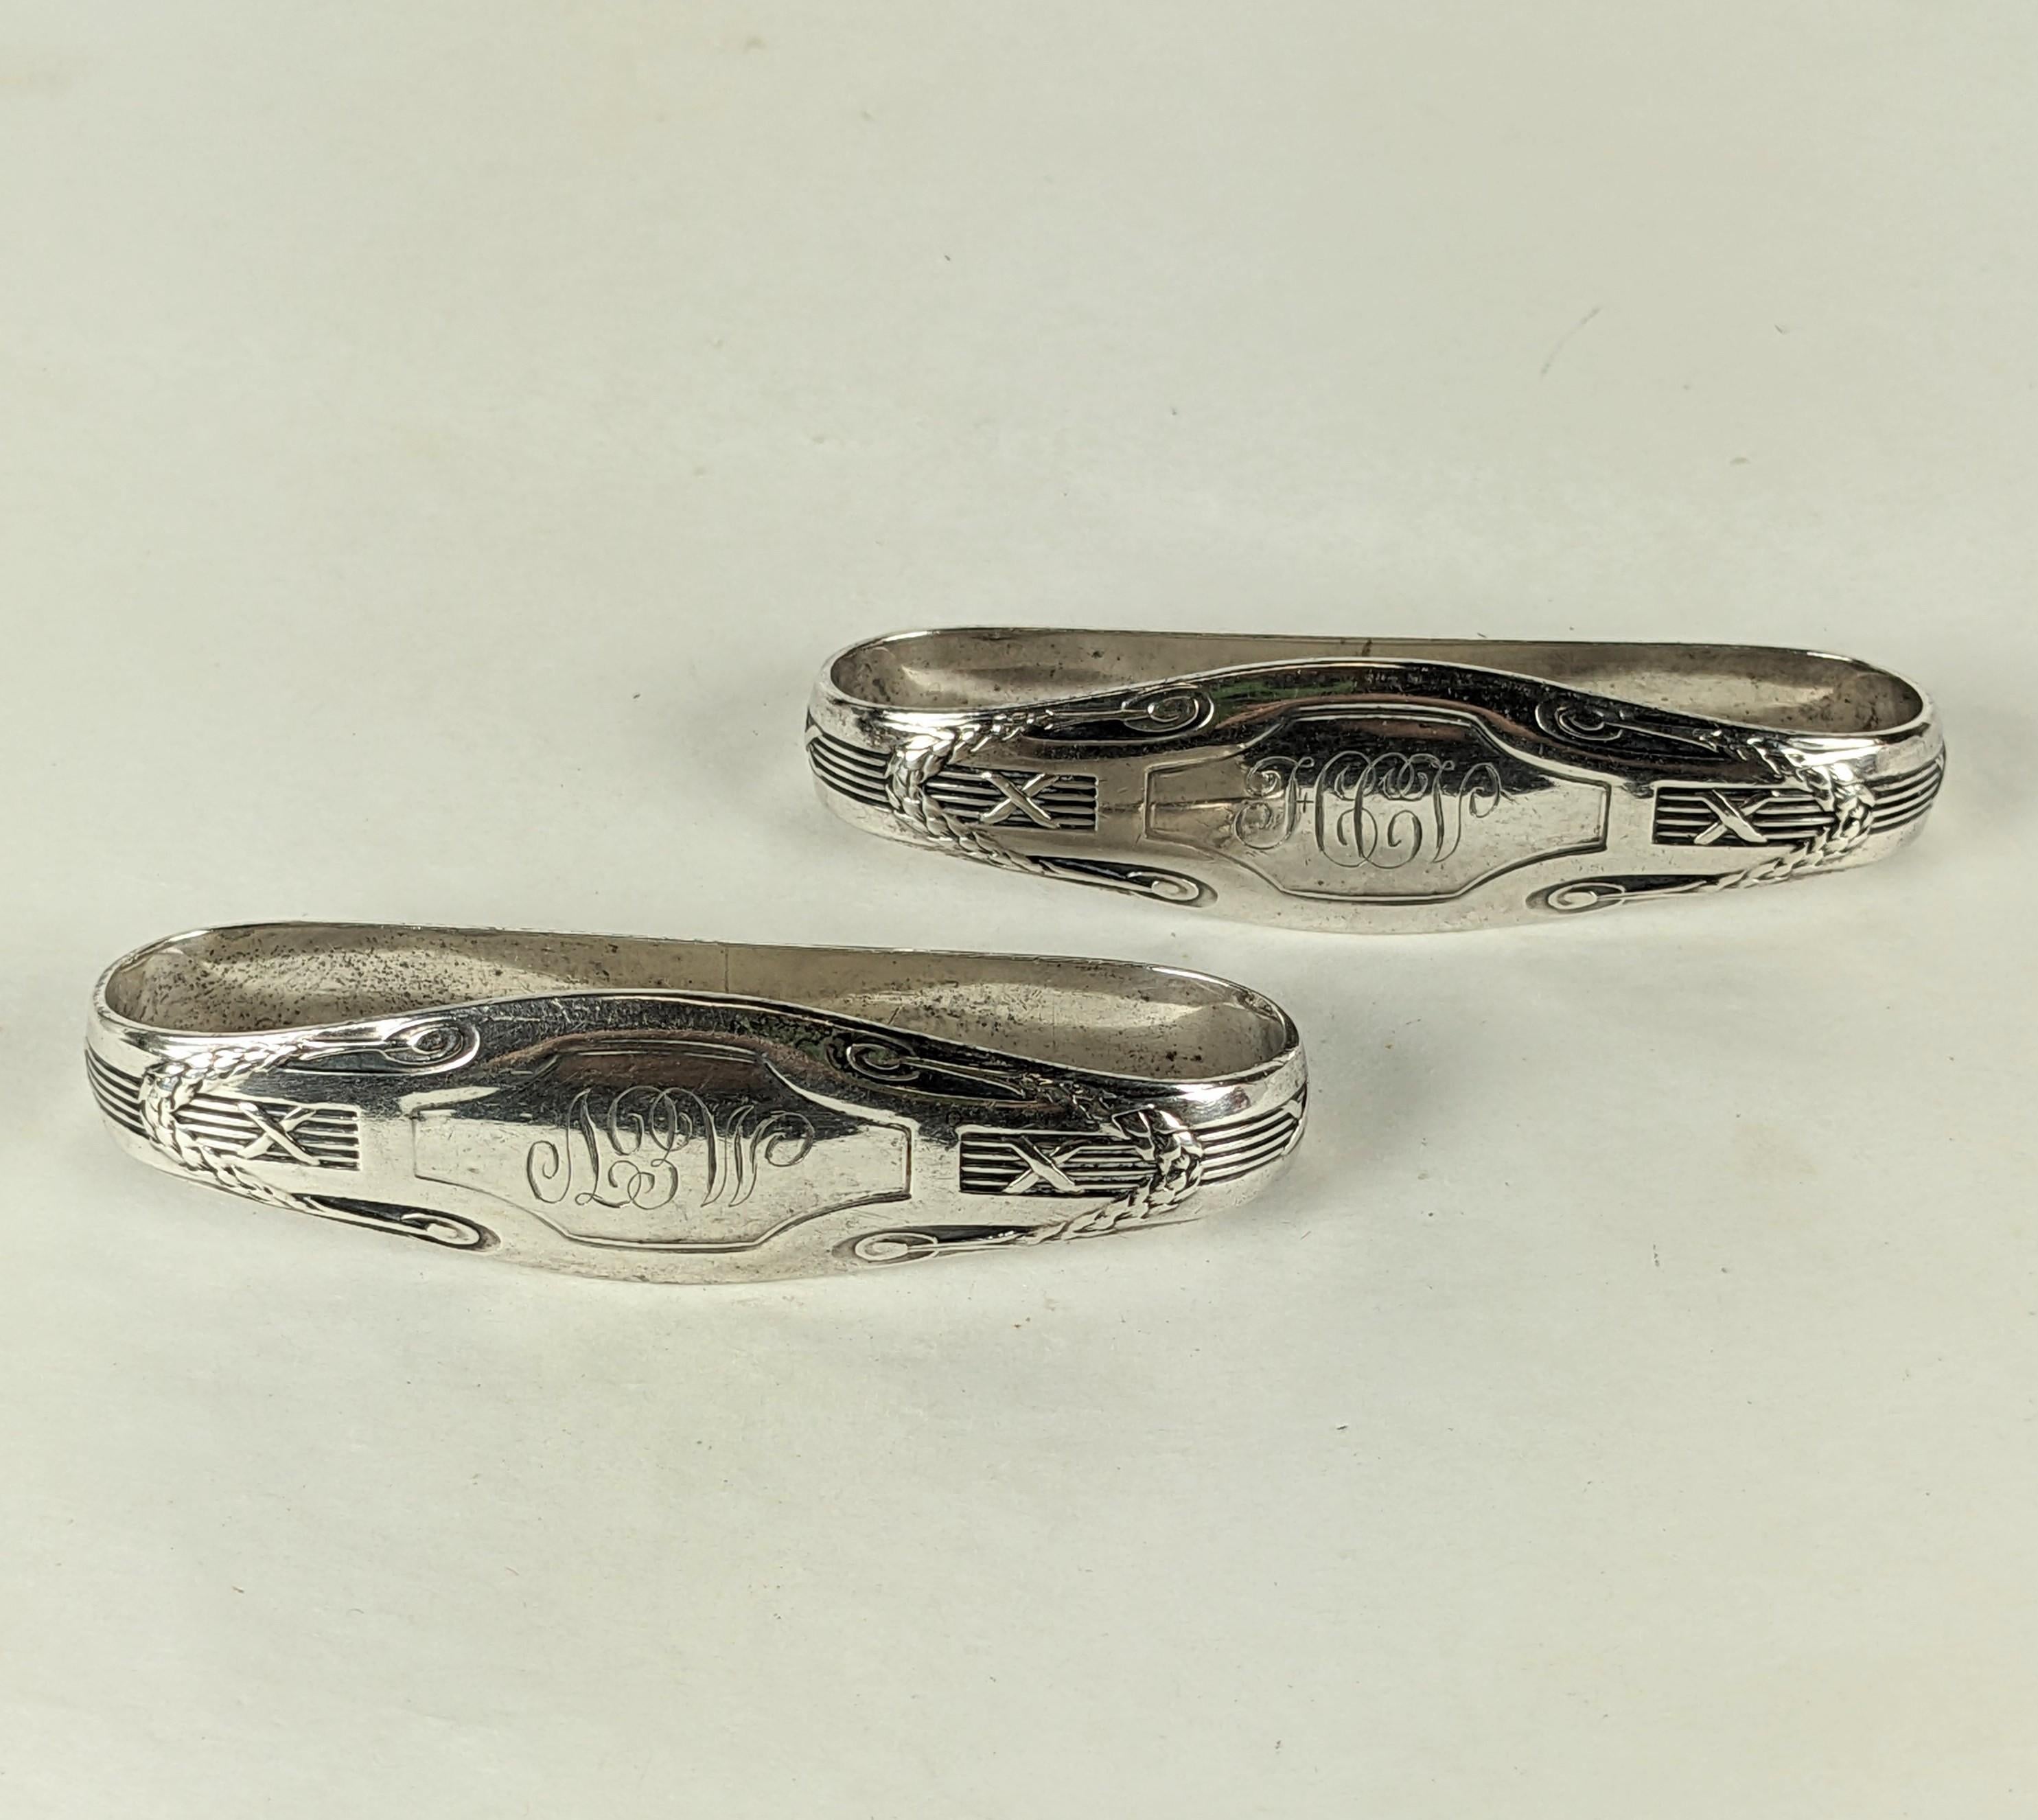 Early 20th Century Pair of Unger Brothers Edwardian Napkin Holders For Sale